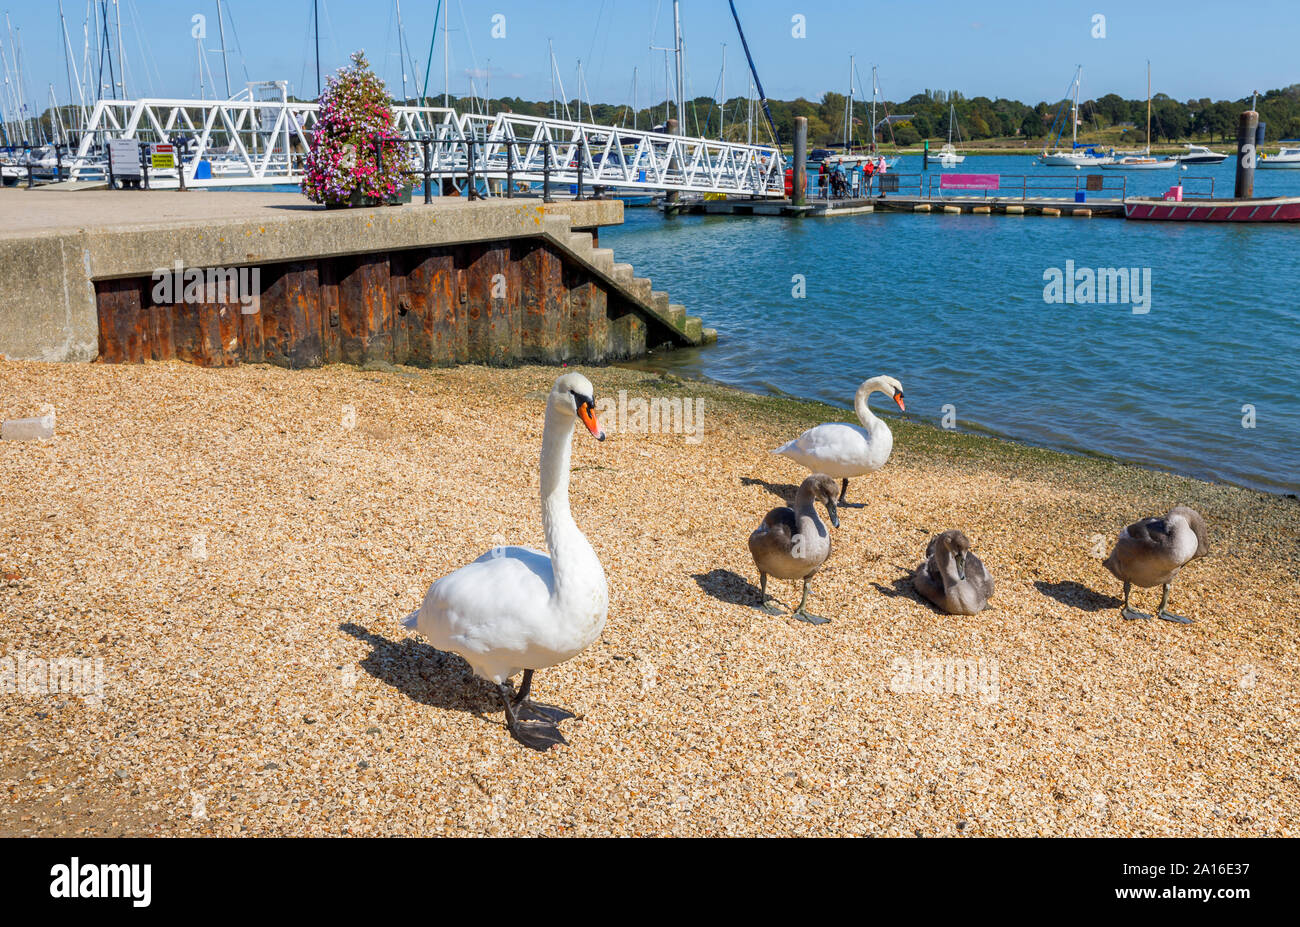 Swans on the River Hamble shoreline at Hamble-le-Rice, a coastal village in the Solent in the Borough of Eastleigh, Hampshire, south coast England, UK Stock Photo